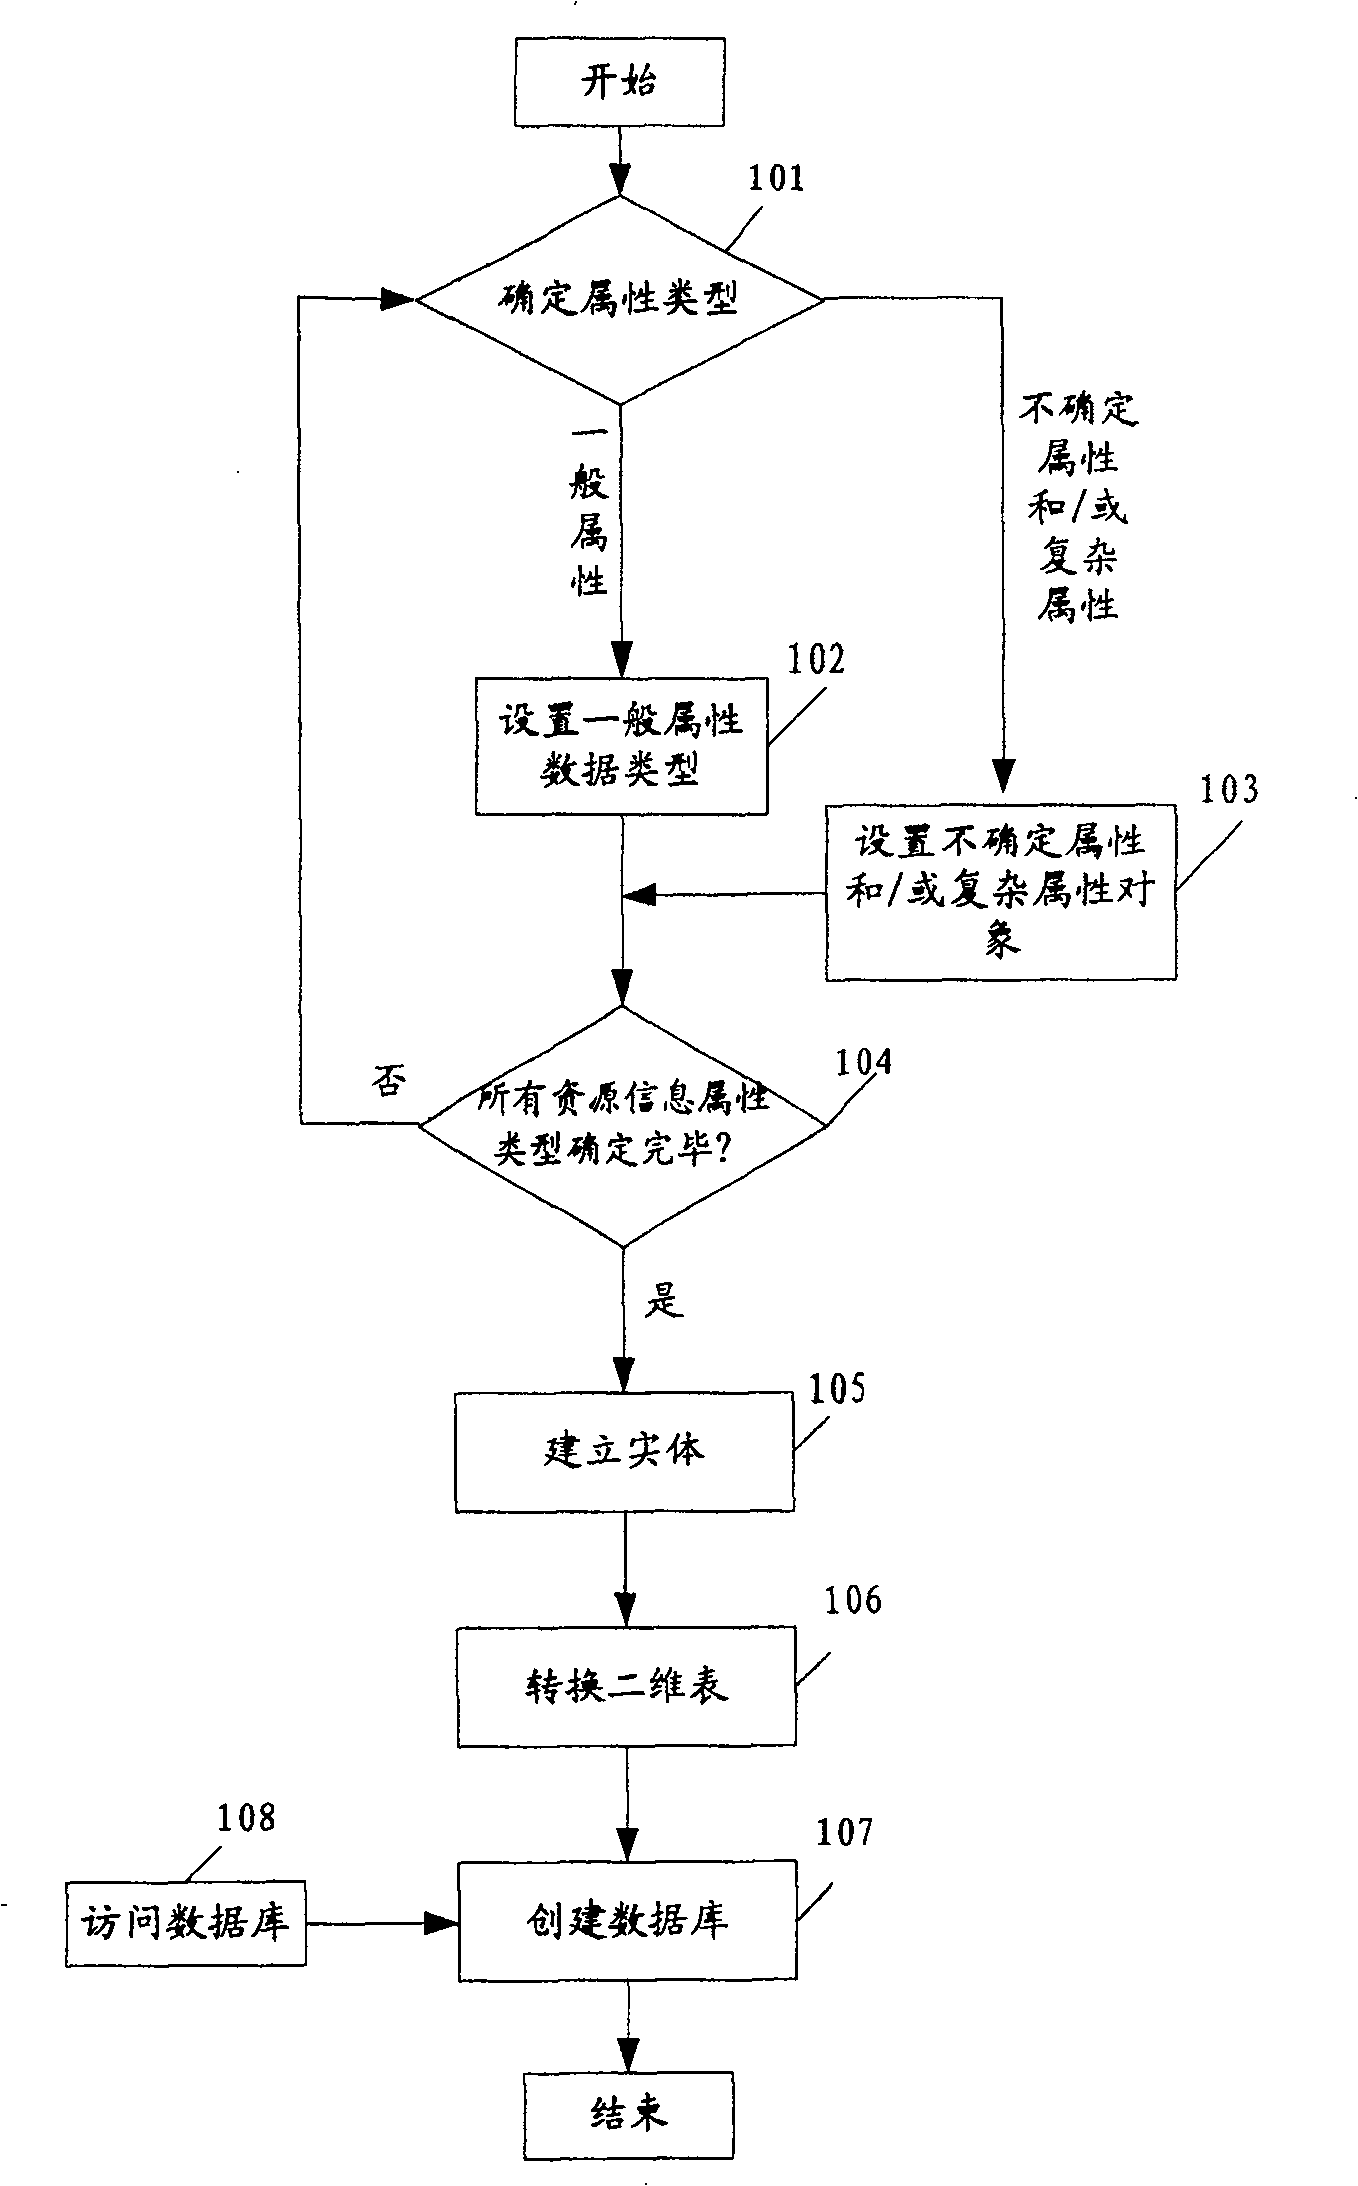 Method for network managing resource message access